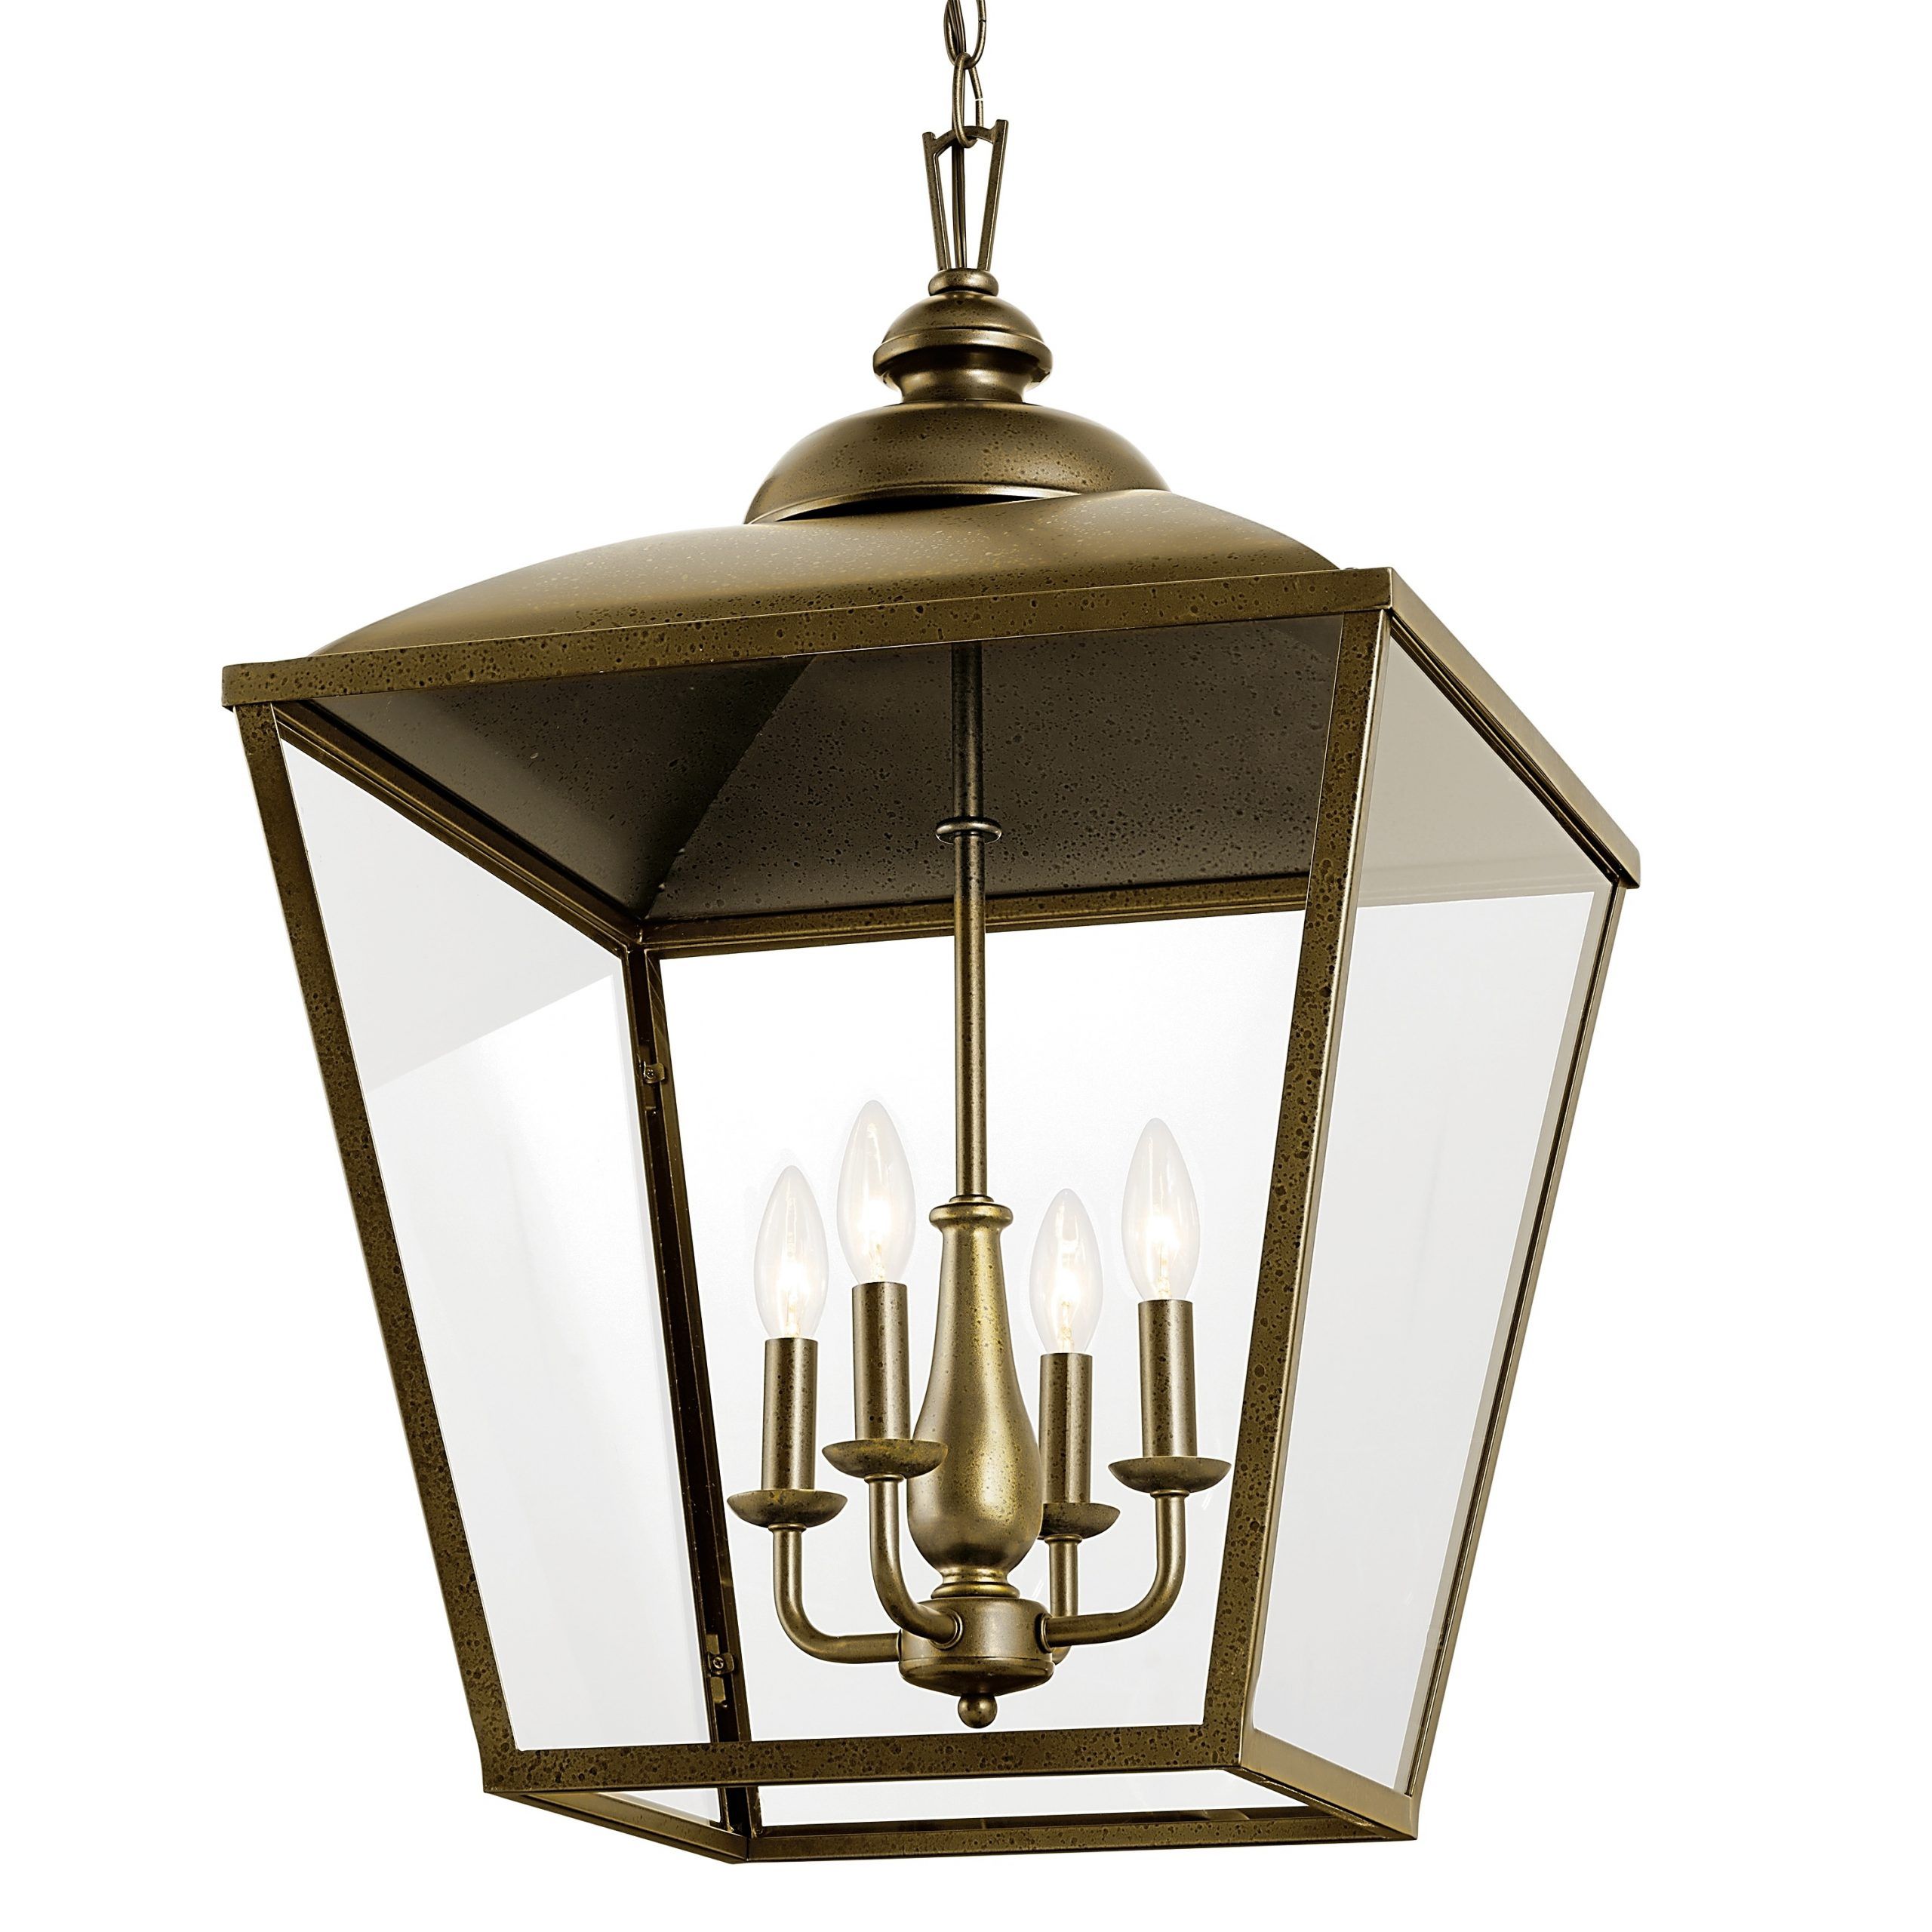 Famous Kichler Lighting Dame 27 Inch 4 Light Foyer Pendant Character Bronze With  Clear Glass – Overstock – 35747082 With 27 Inch Lantern Chandeliers (View 1 of 15)